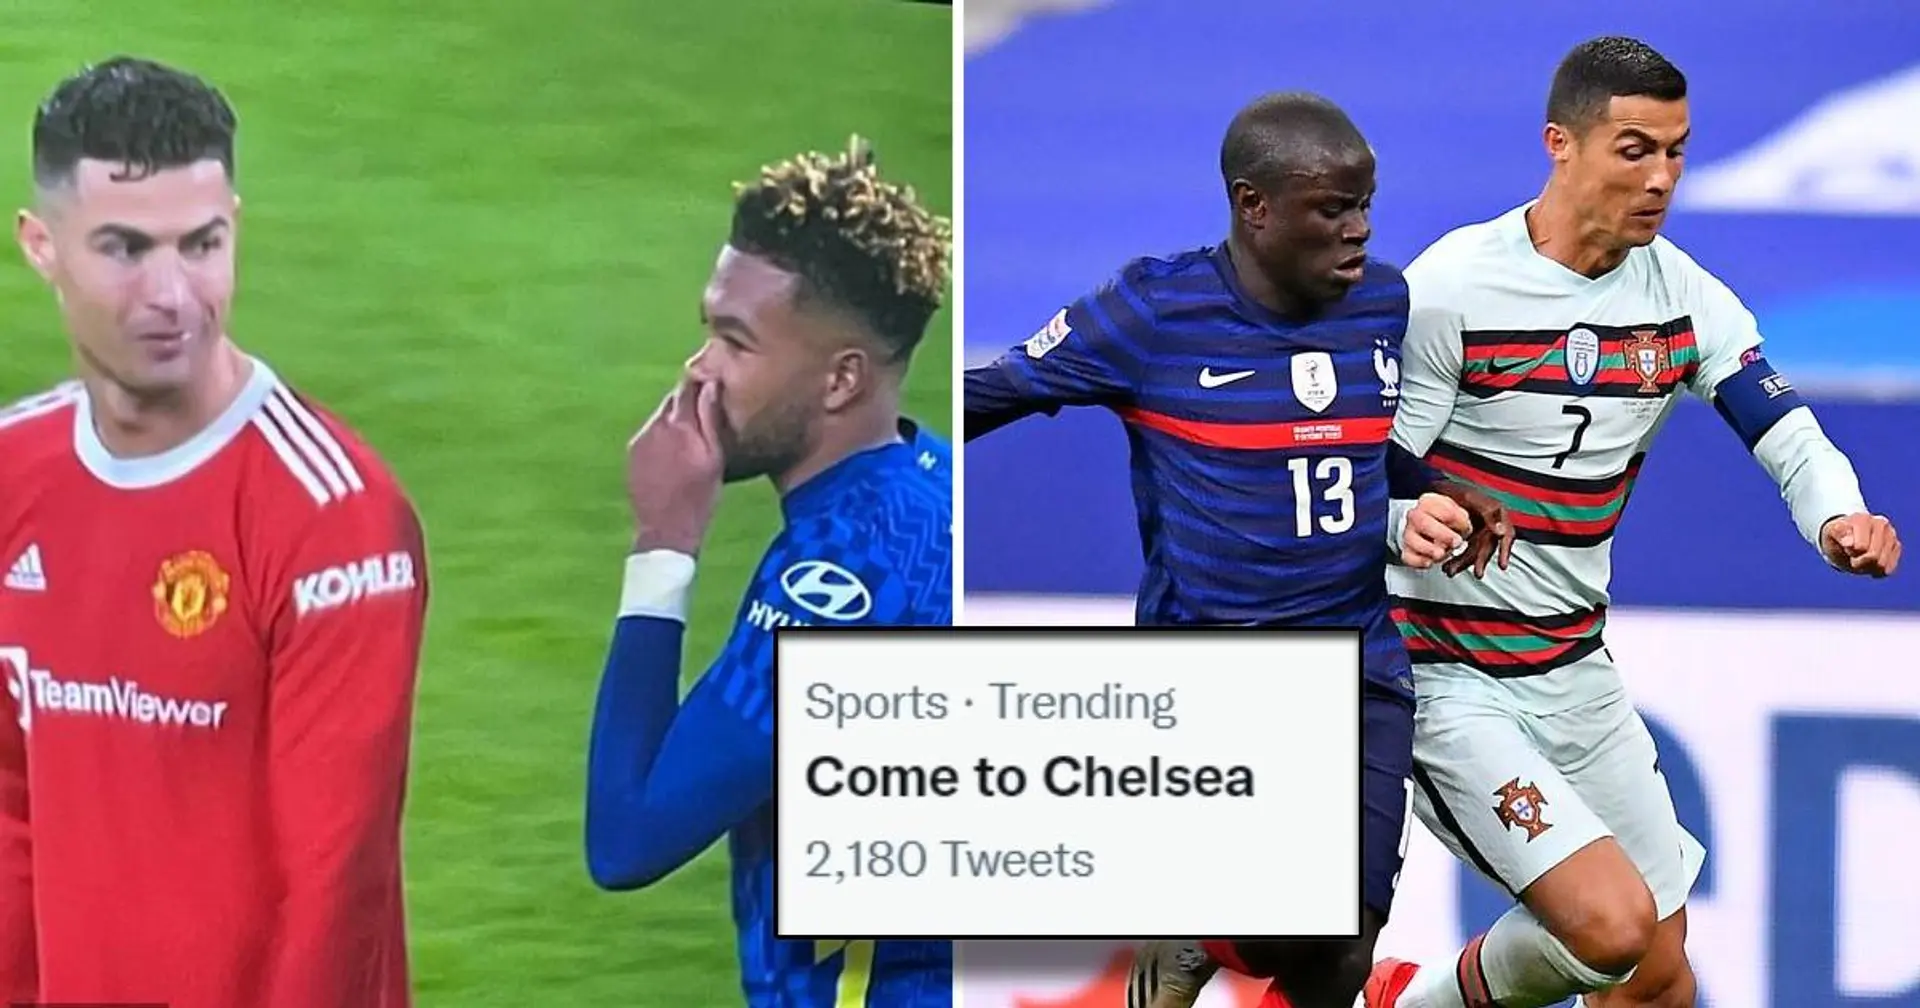 'Come to Chelsea' trends on Twitter as fans plead for Cristiano Ronaldo to join club